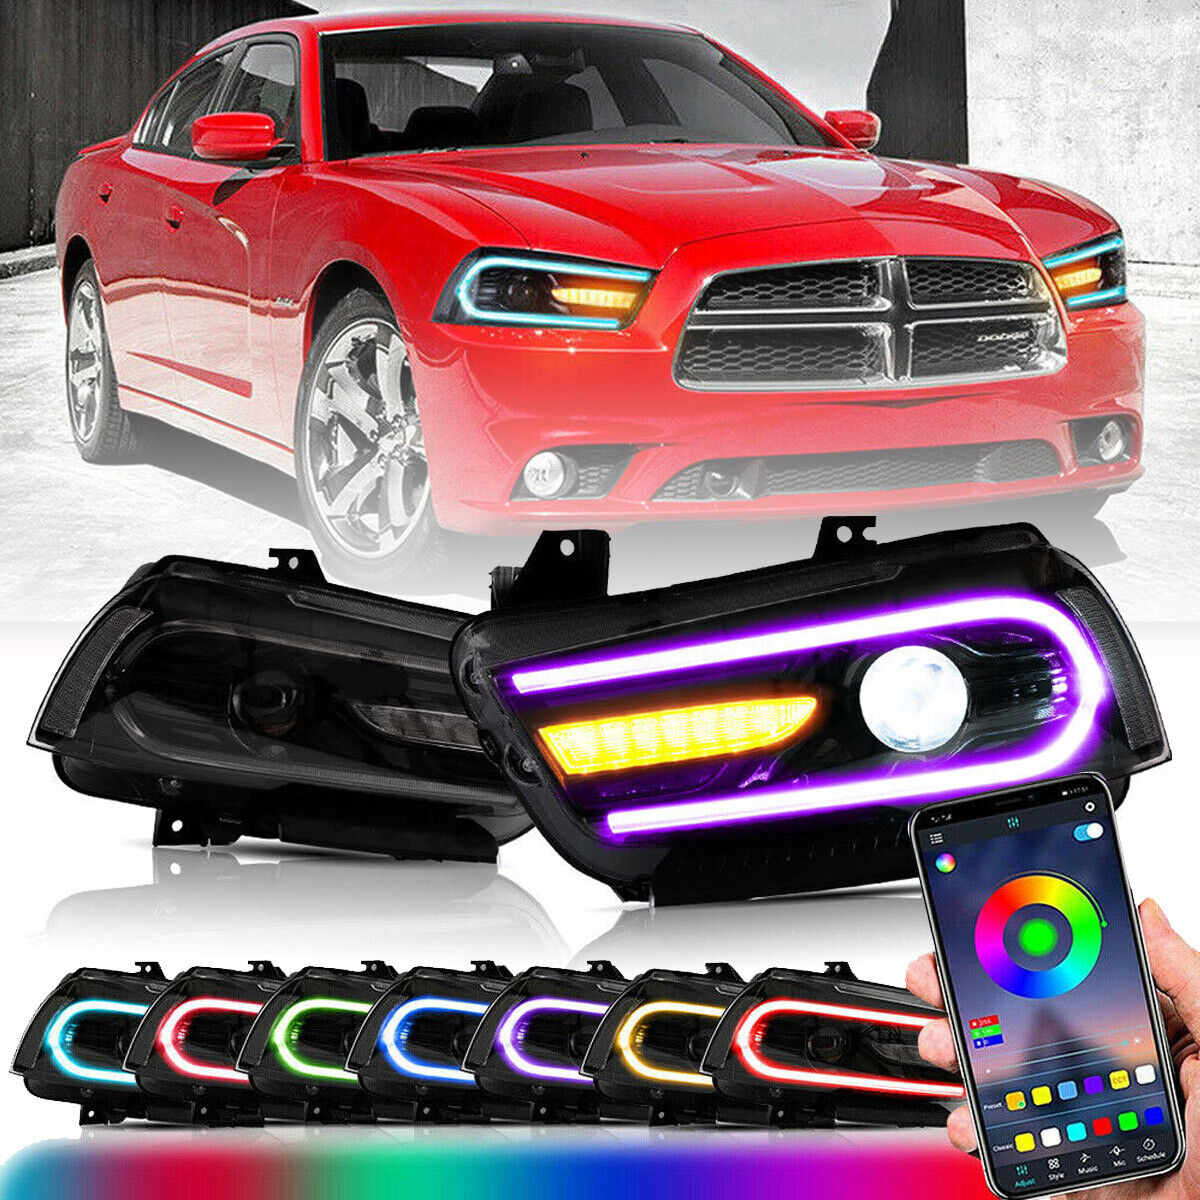 VLAND LED Headlights RGB Color Change Lamp For 2011-2014 Dodge Charger Dual Beam